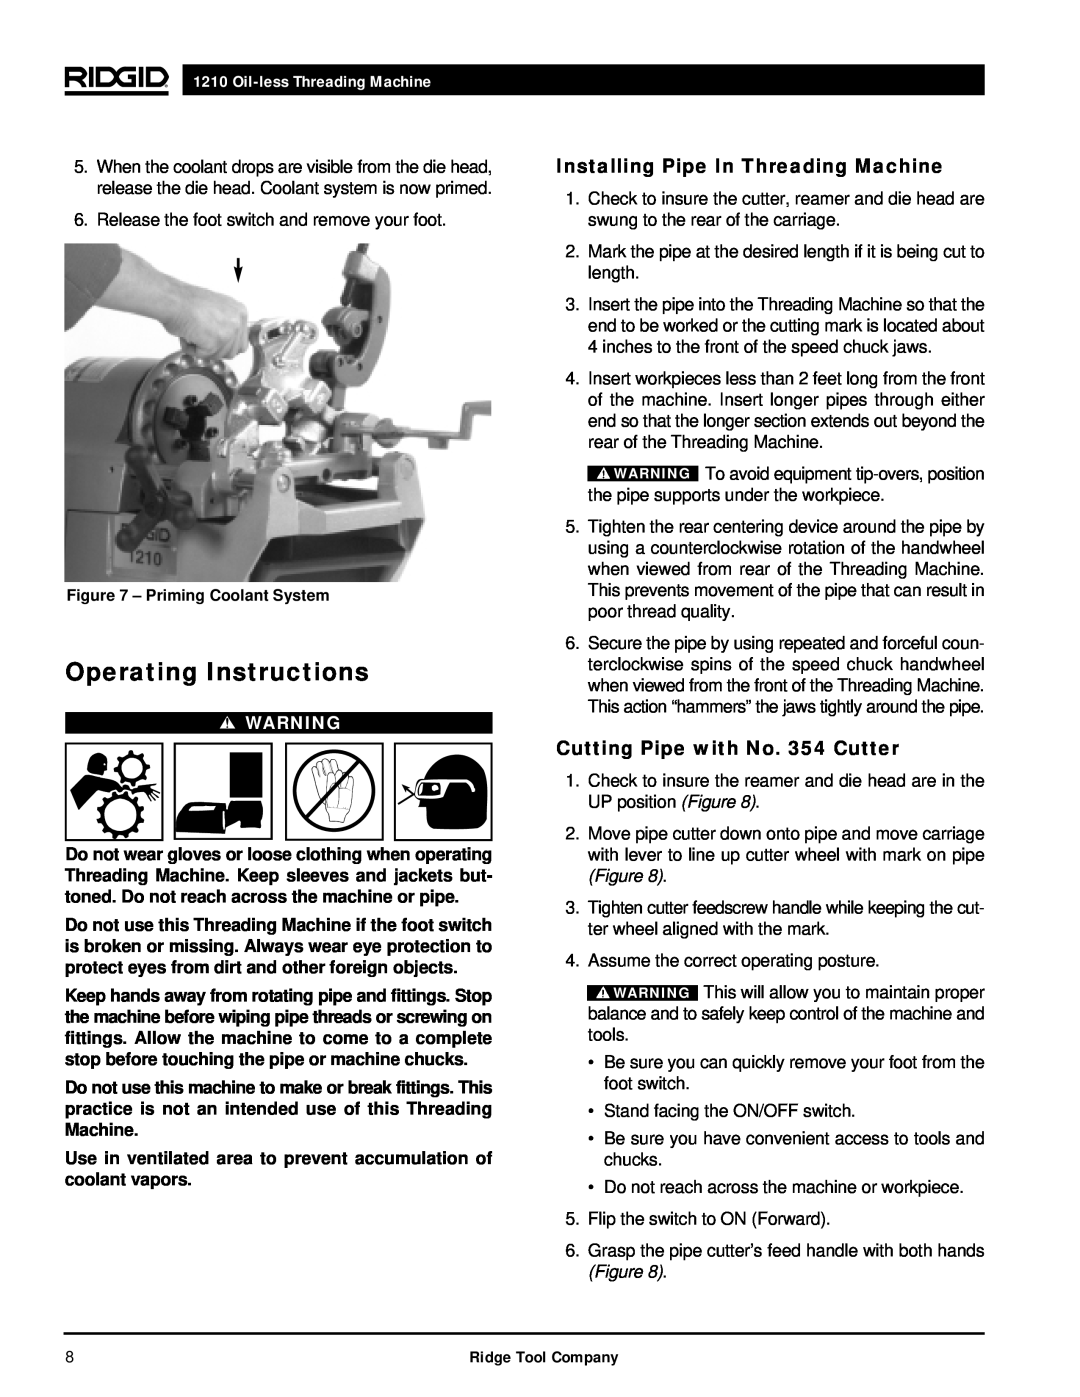 RIDGID 1210 manual Operating Instructions, Installing Pipe In Threading Machine, Cutting Pipe with No. 354 Cutter 